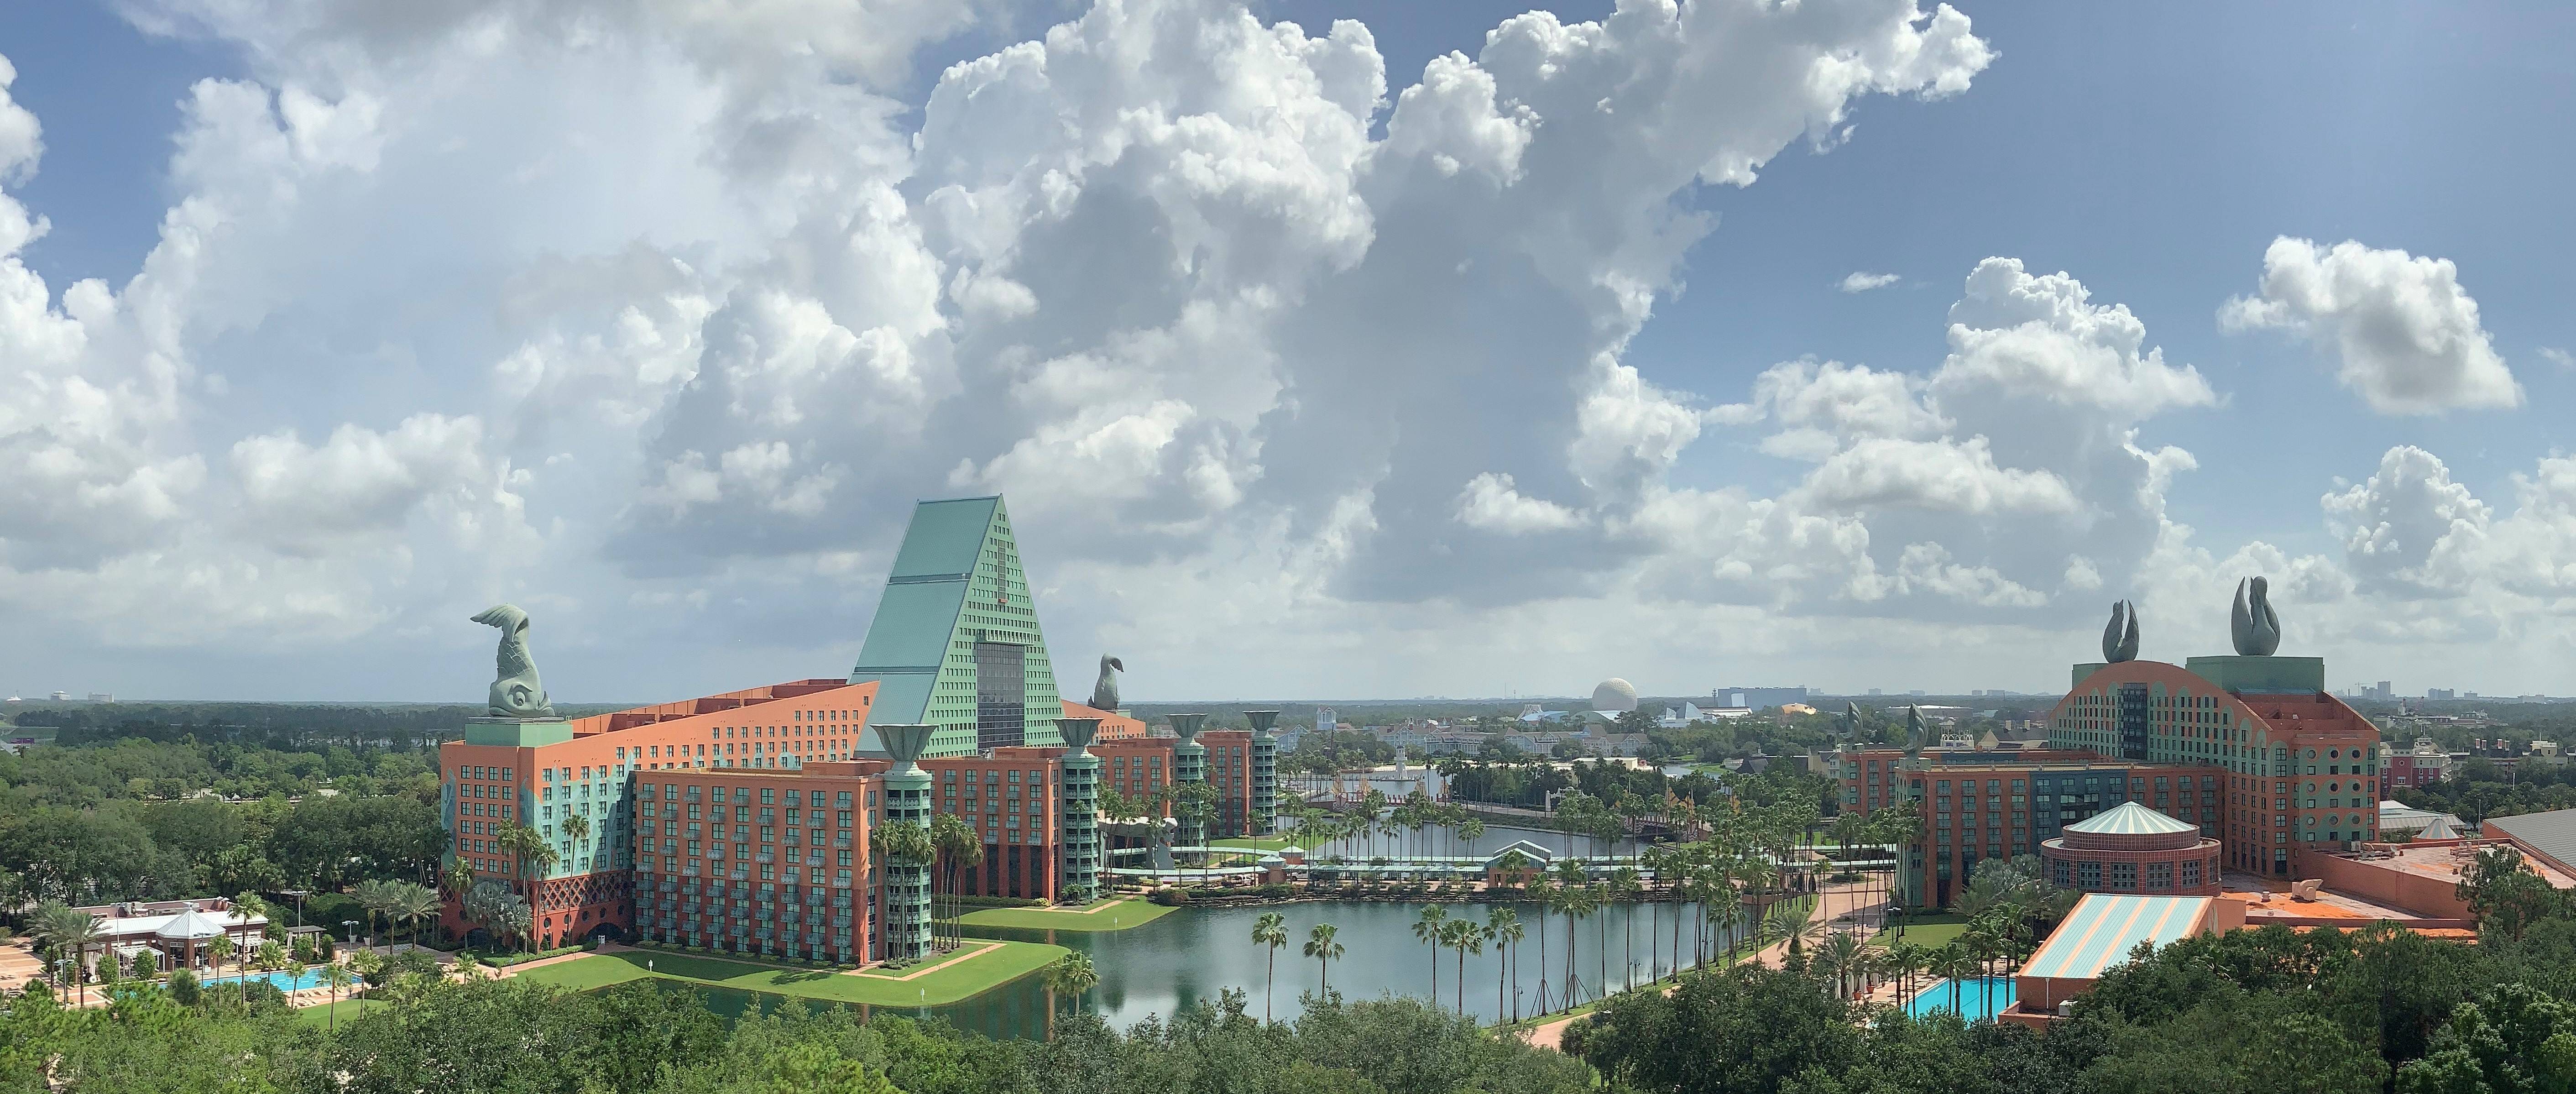 PHOTOS - Views from the top of the Walt Disney World Swan Reserve